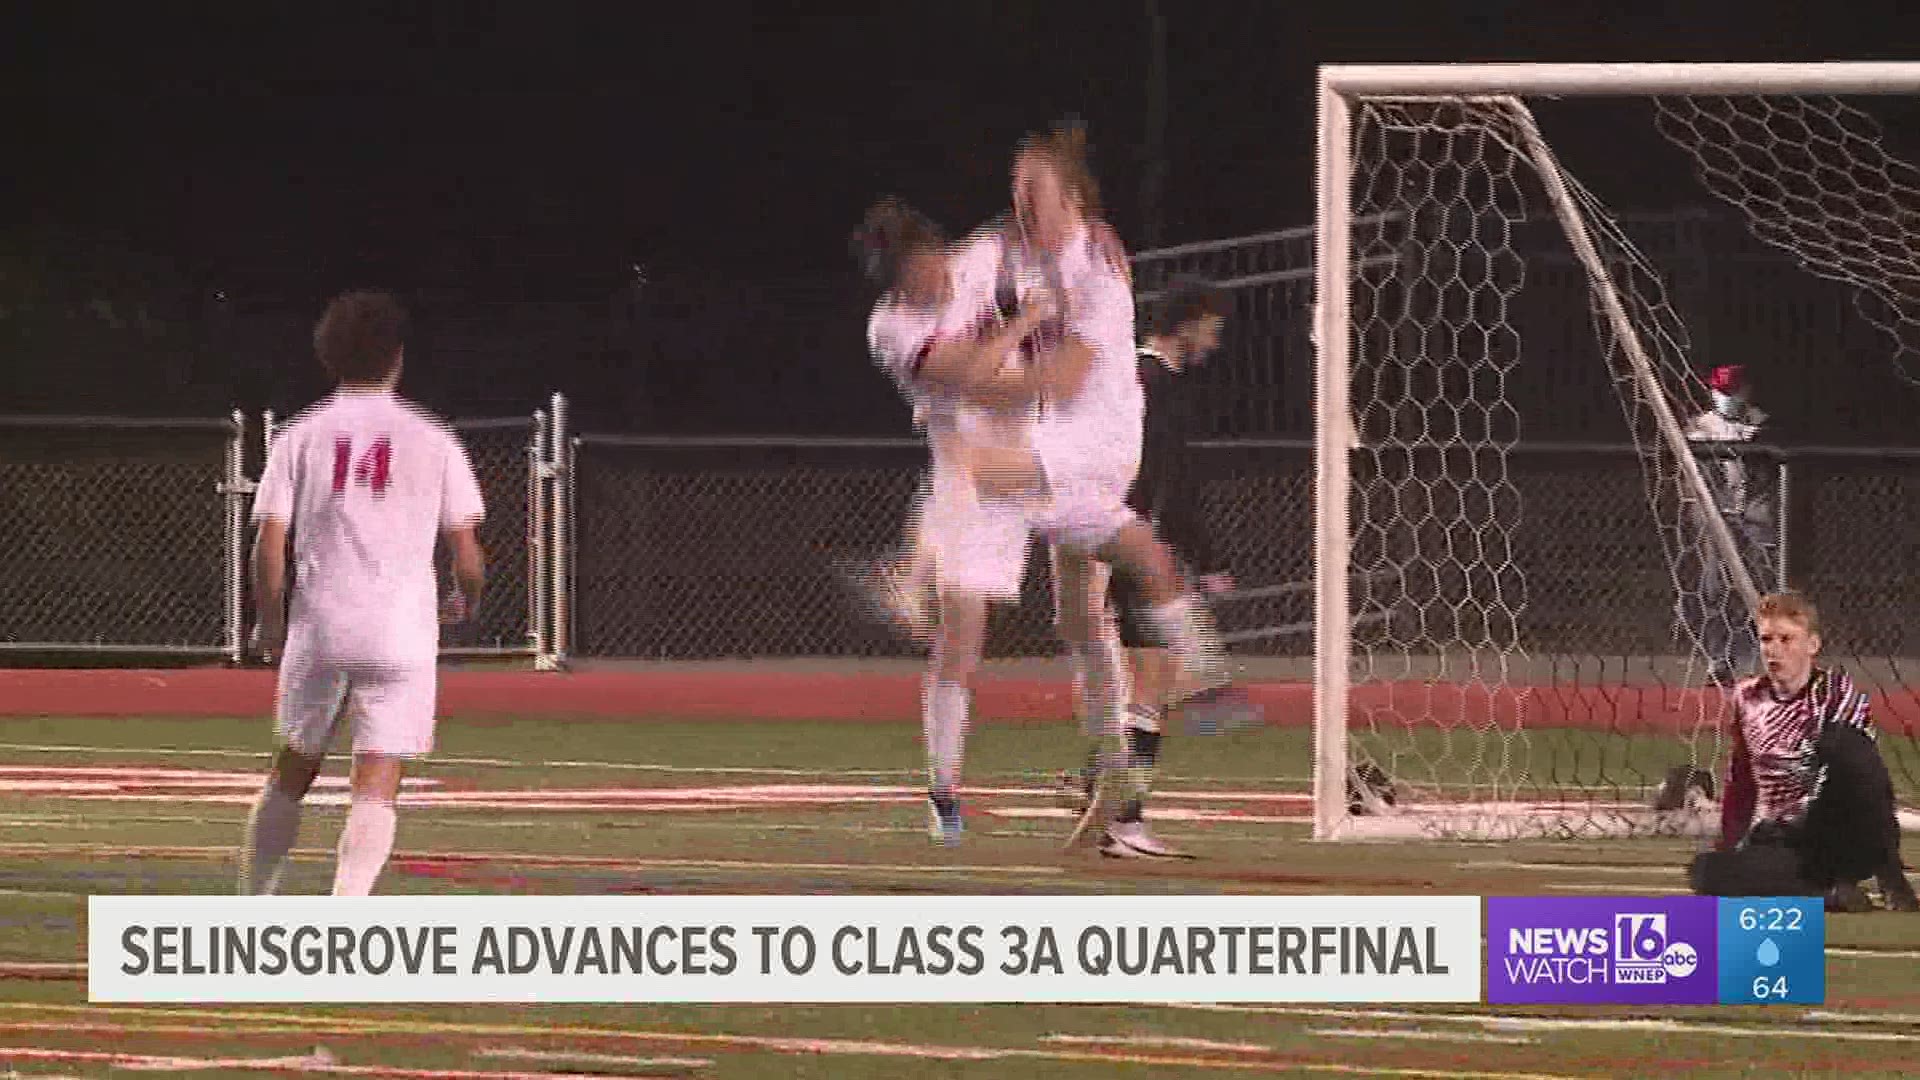 Selinsgrove, after a 4-3 win over Crestwood, advances to the State Quarterfinals in Boys Soccer.  That is where the Seals season ended in 2019.